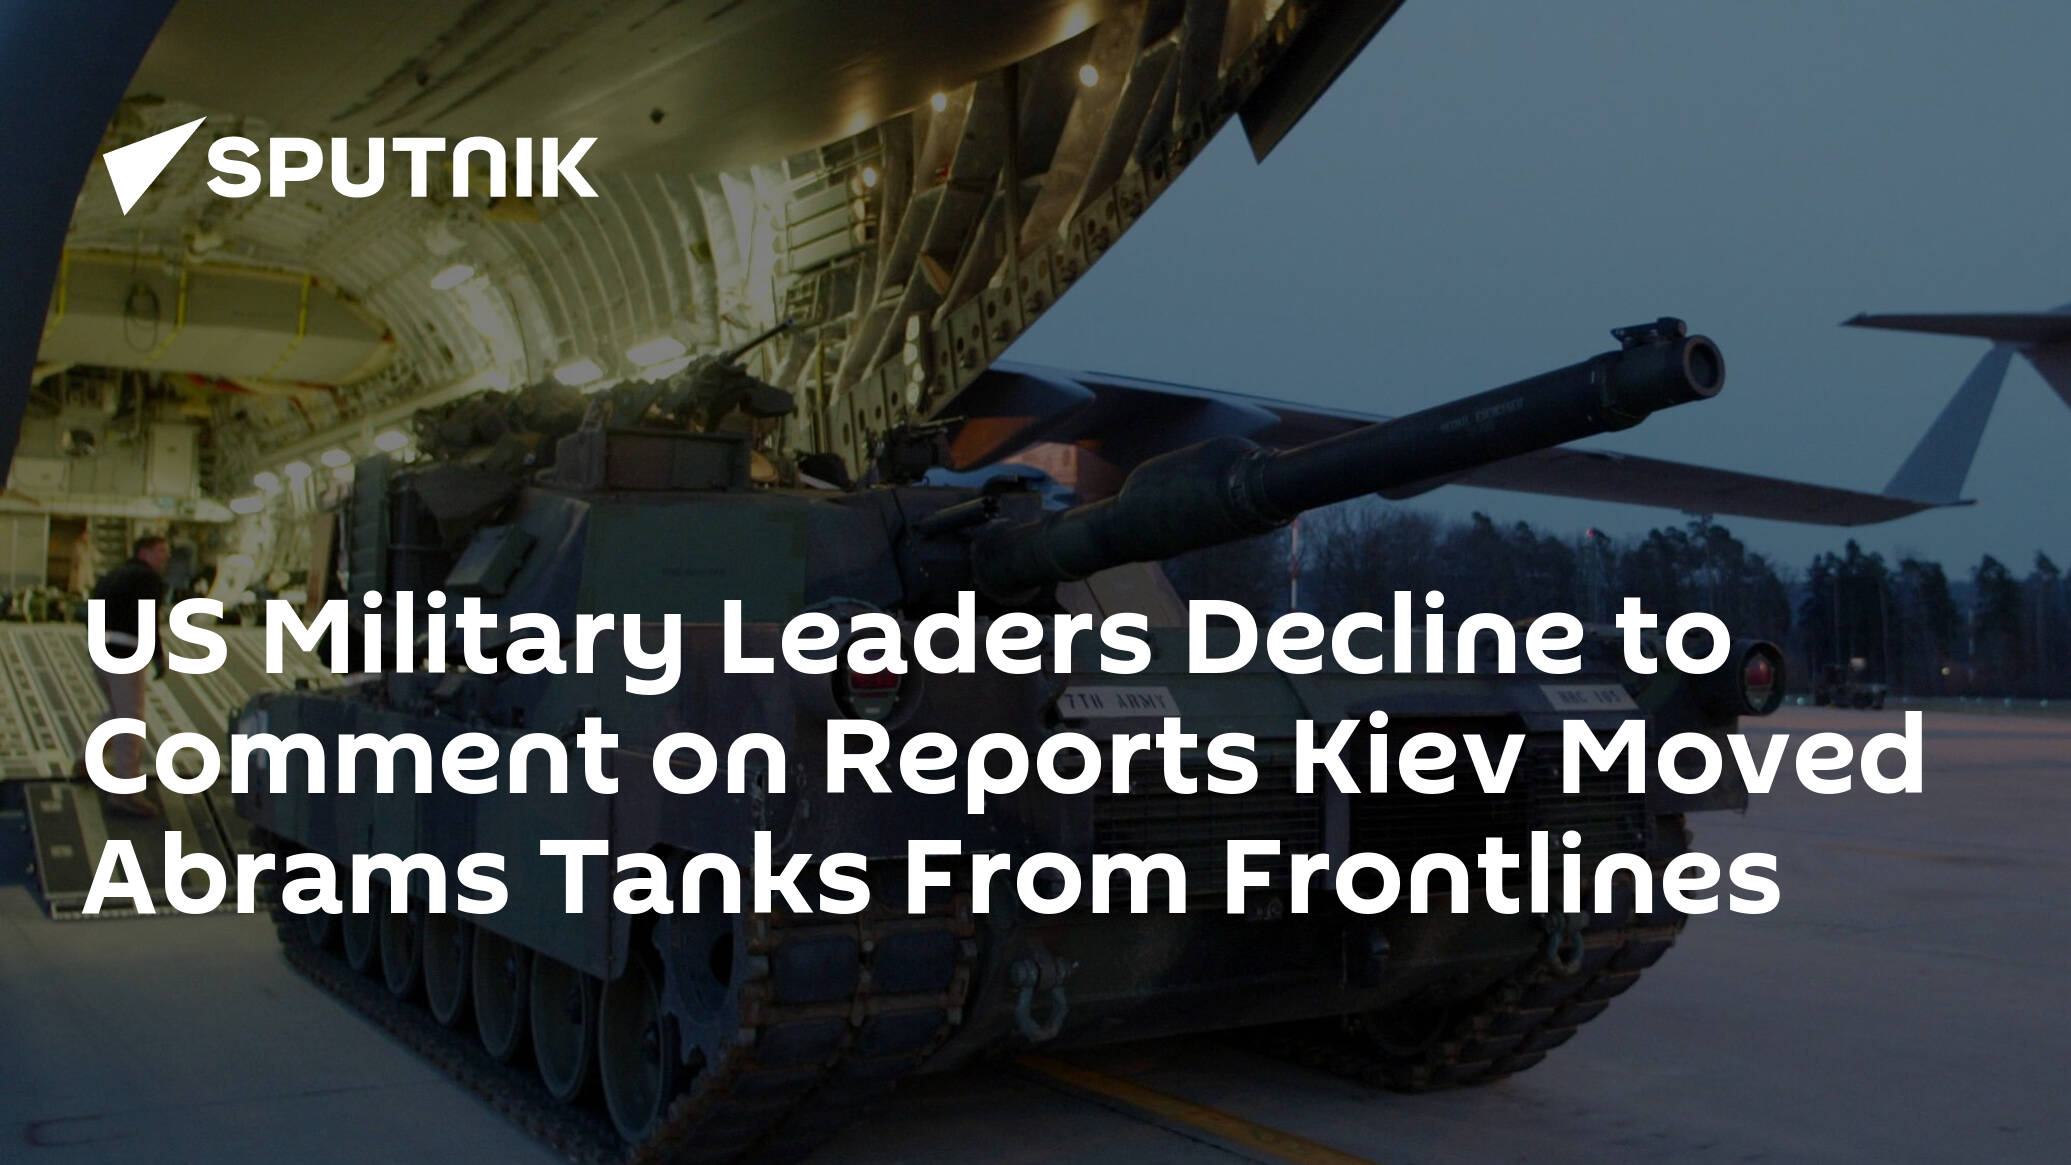 US Military Leaders Decline to Comment on Reports Kiev Moved Abrams Tanks From Frontlines